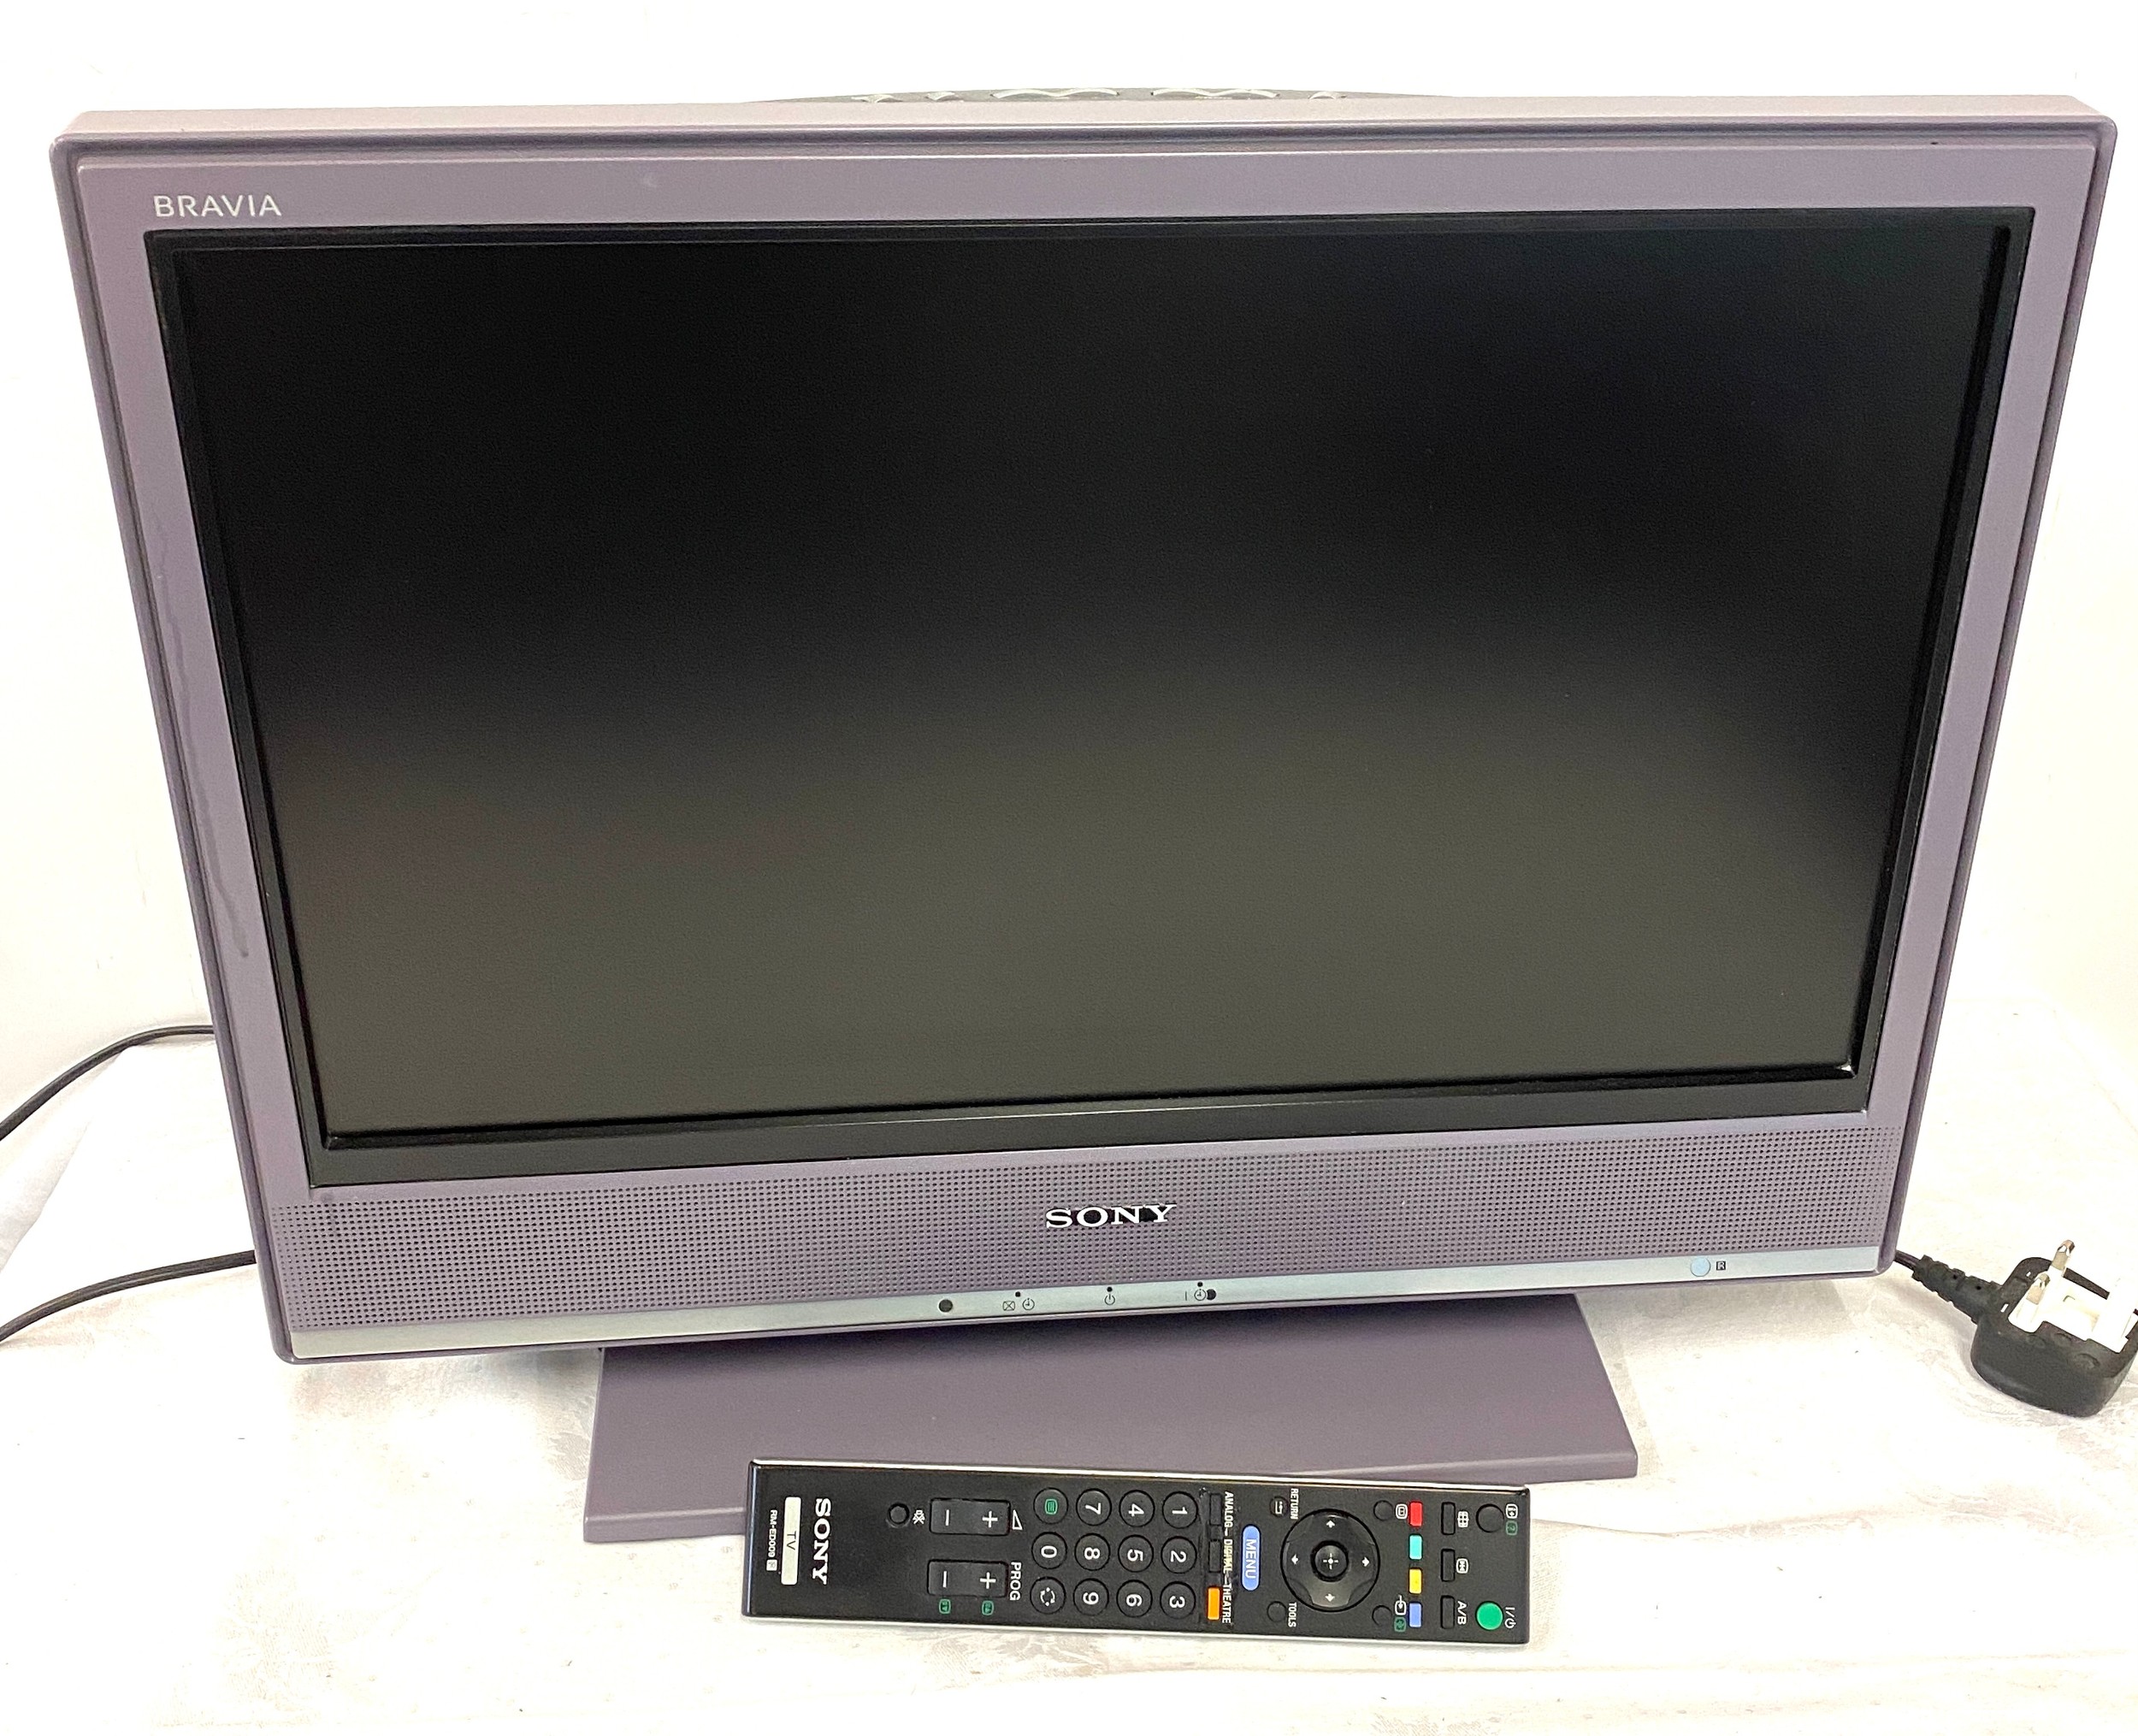 Sony 20 inch tv with remote, working order